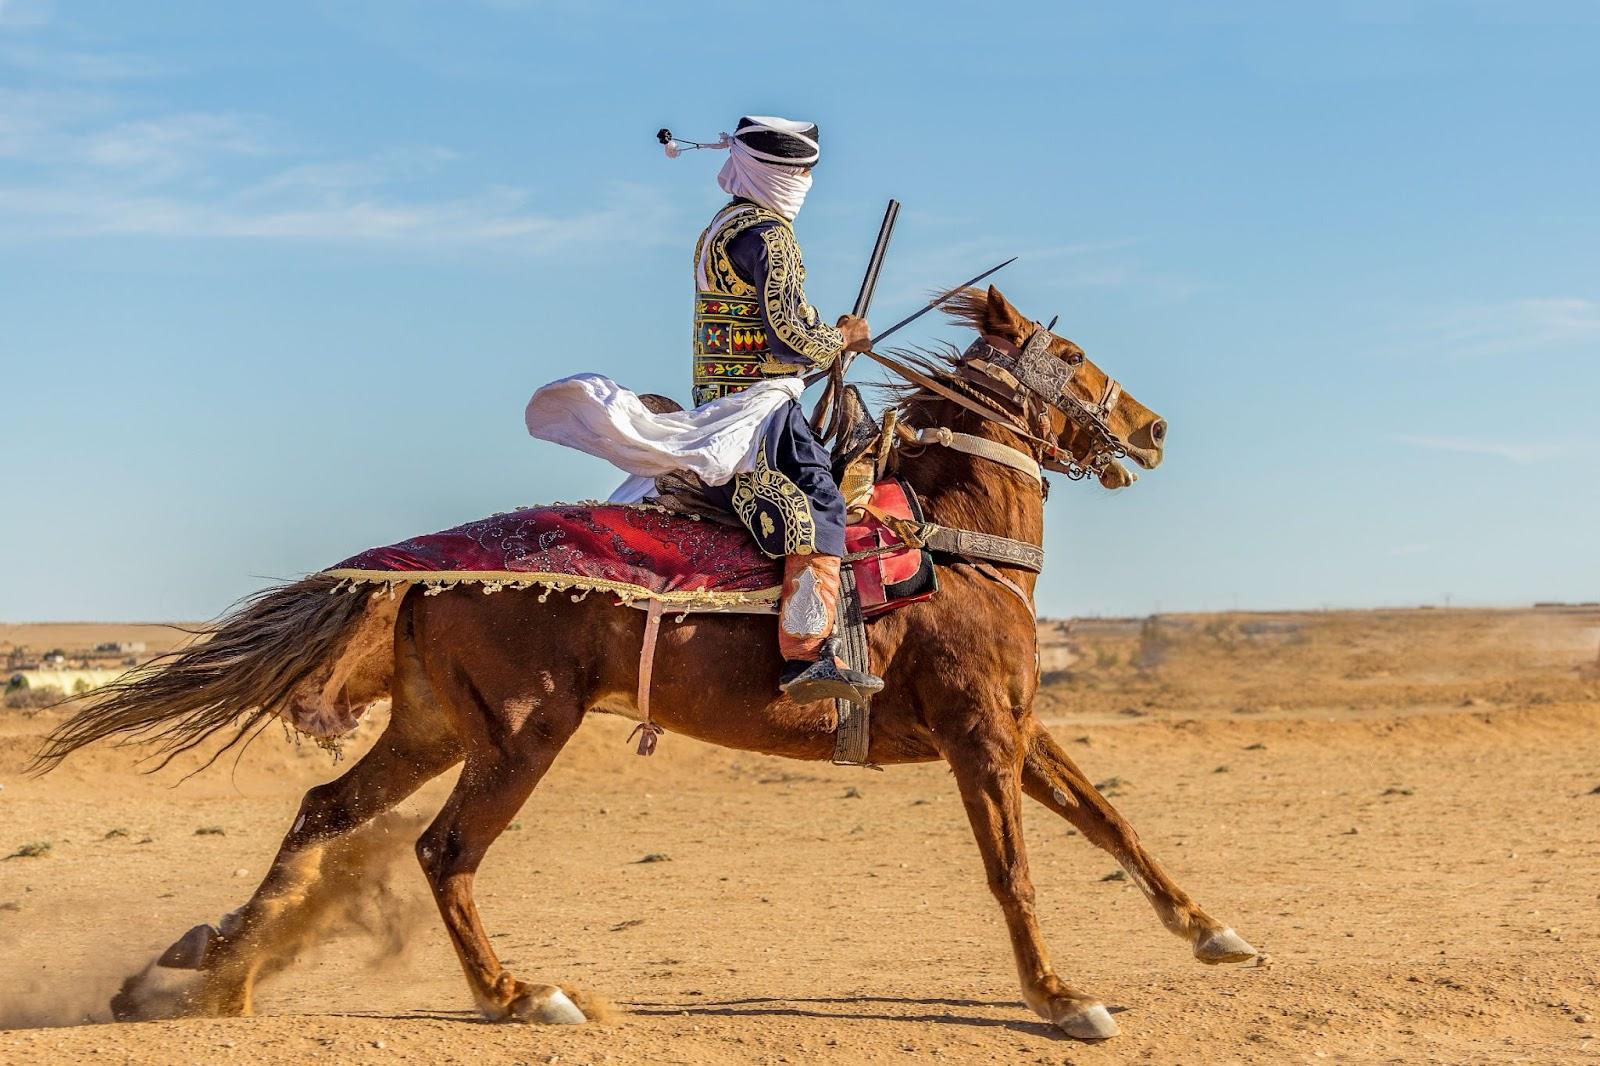 Fantasia is a traditional exhibition of horsemanship performed during cultural events in northern African region